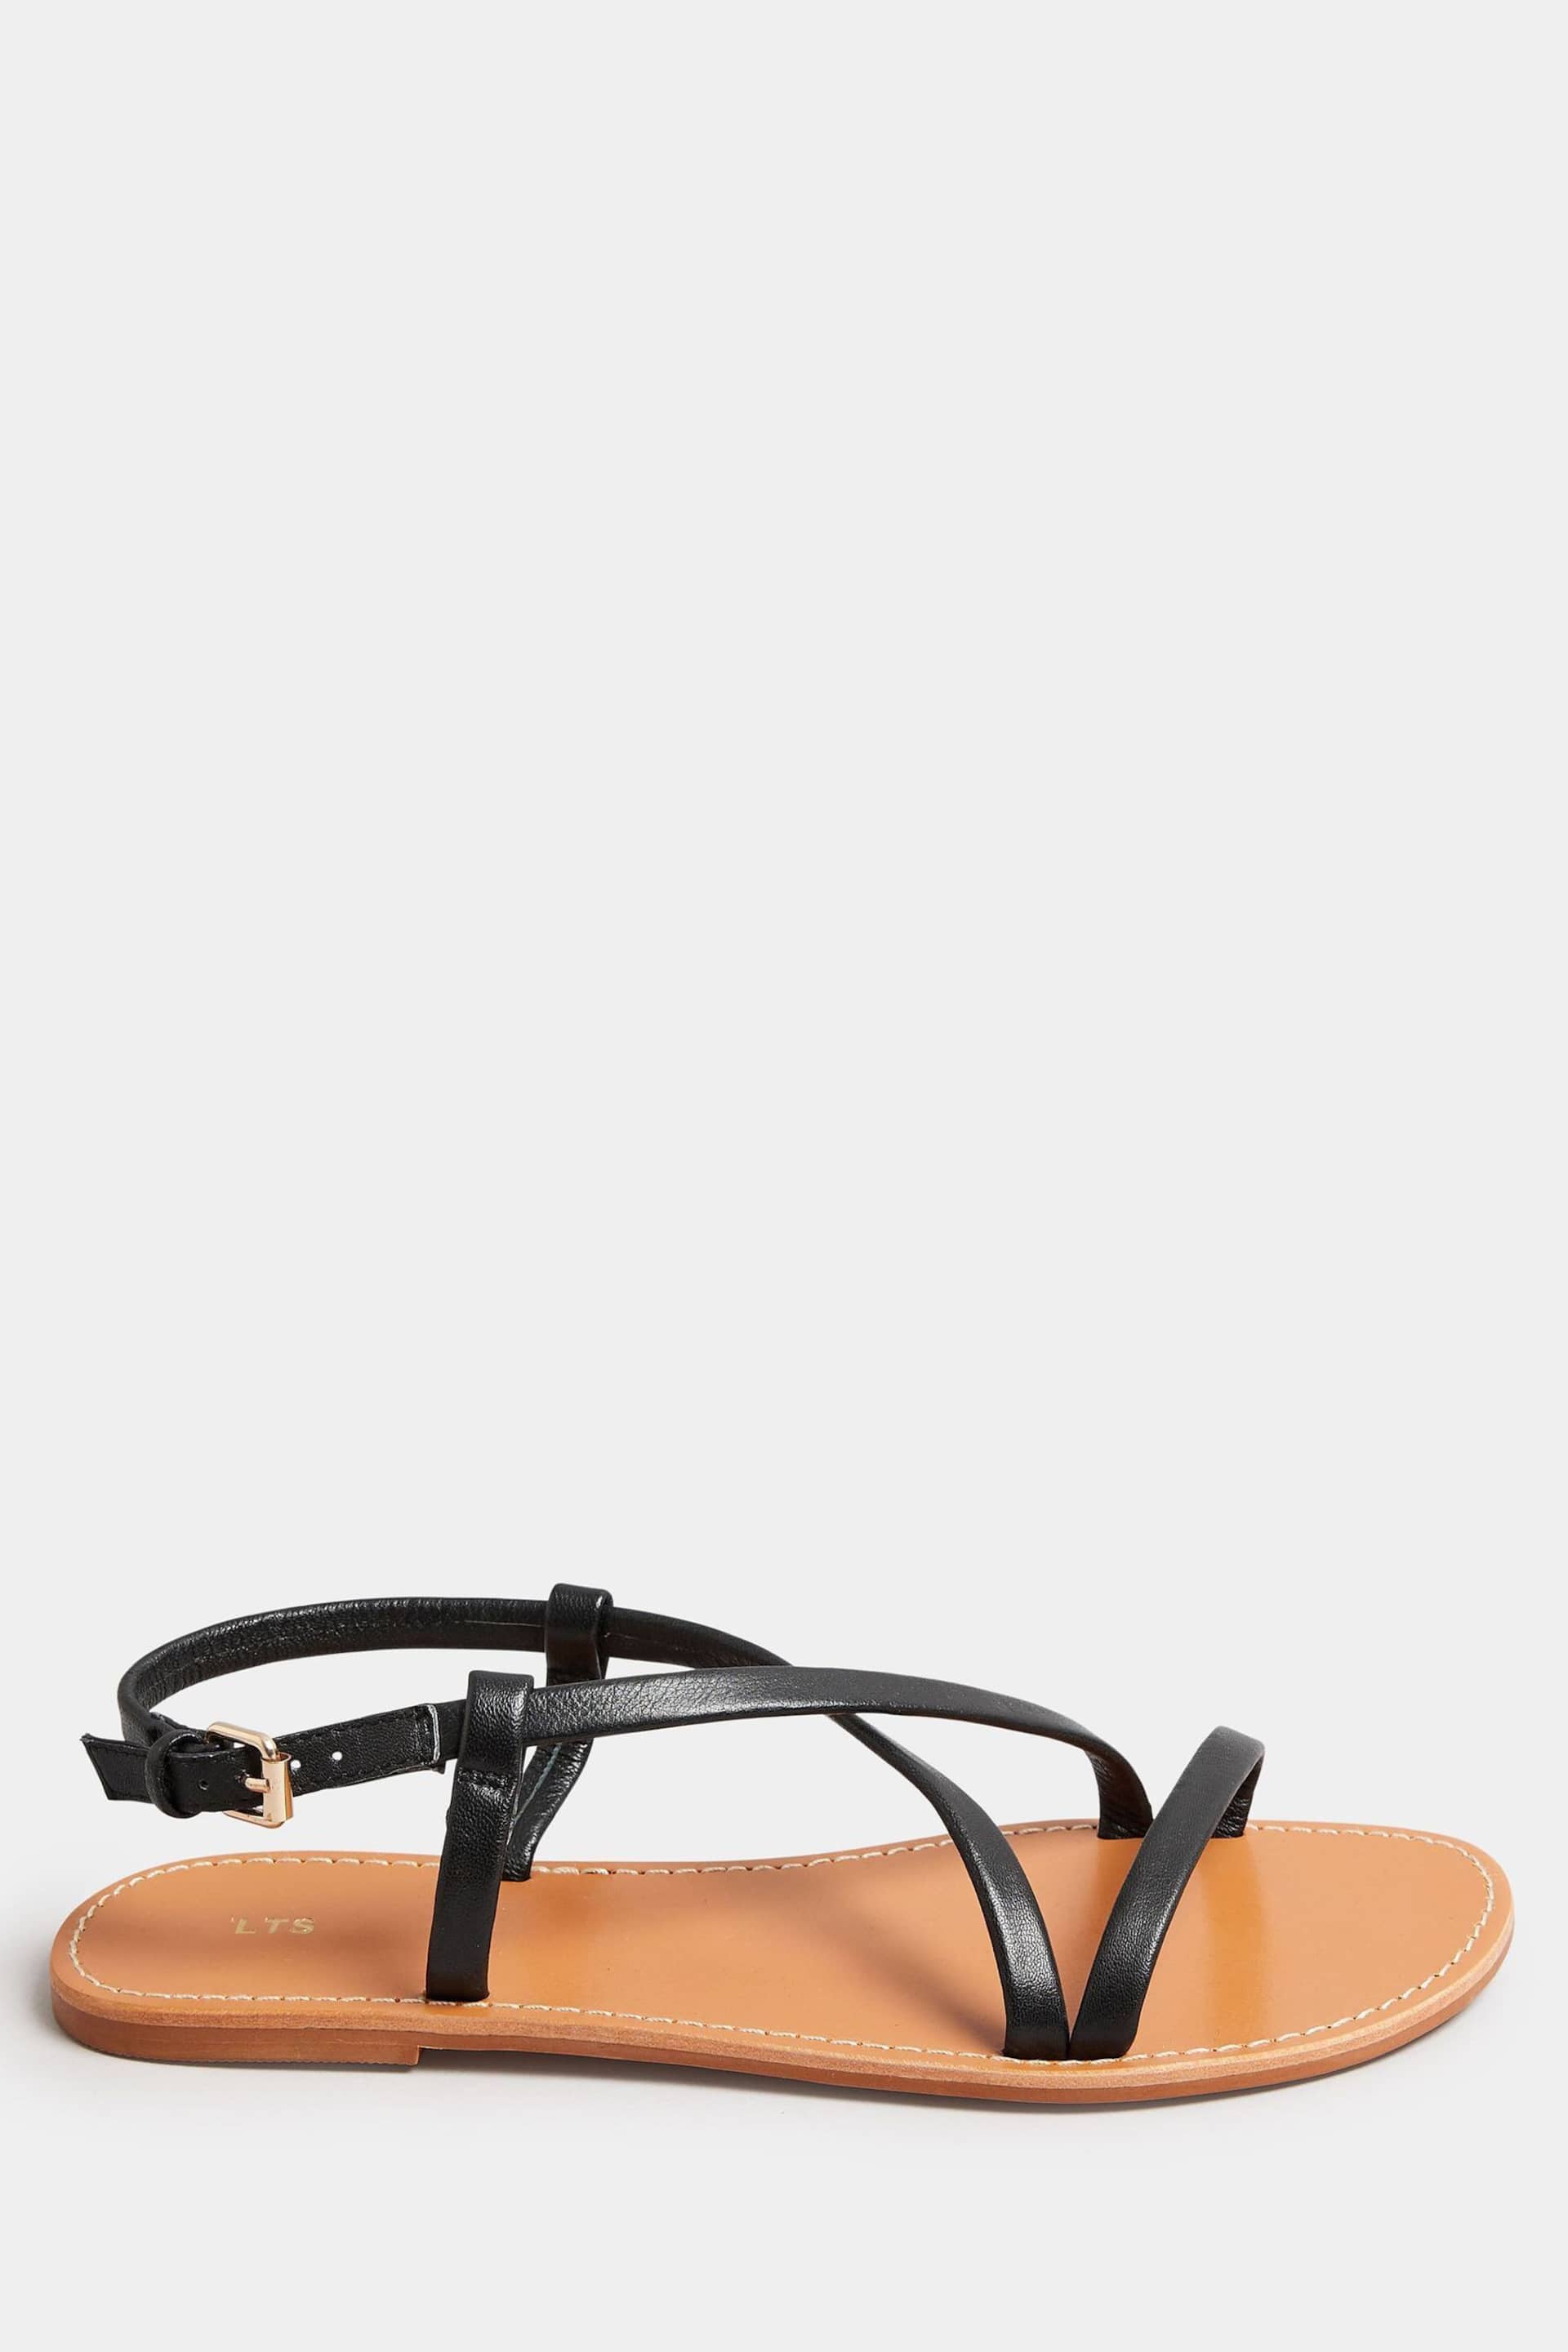 Long Tall Sally Black LTS Black Leather Crossover Strap Flat Sandals In Standard Fit - Image 1 of 3